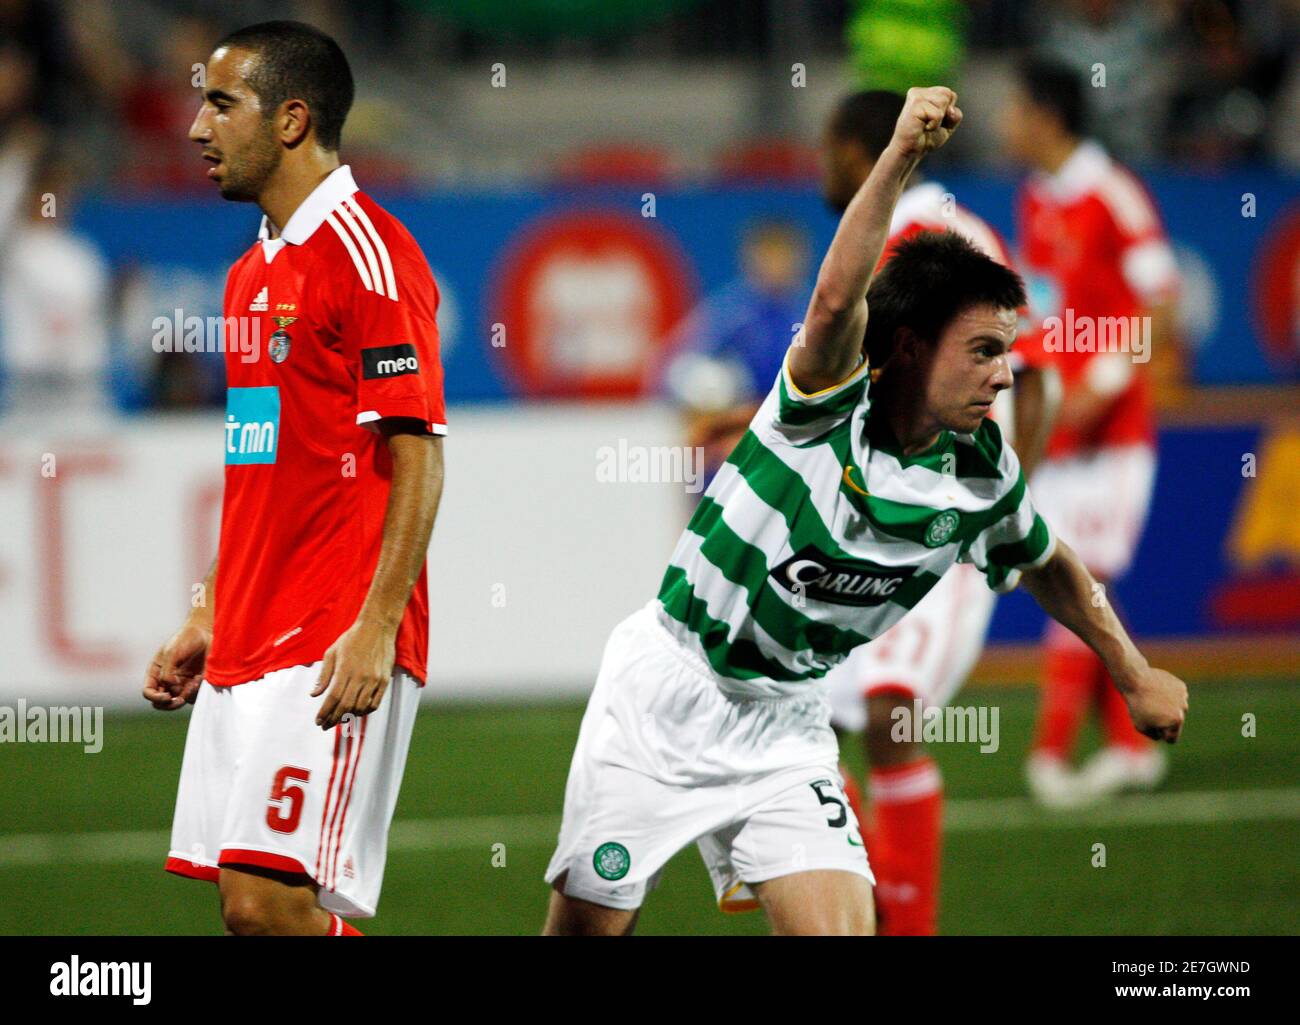 Celtic's Paul McGowan celebrates scoring in front of Benfica's Ruben Amorim  (L) during the first half of their friendly soccer match in Toronto,  September 2, 2009. REUTERS/Mark Blinch (CANADA SPORT SOCCER Stock